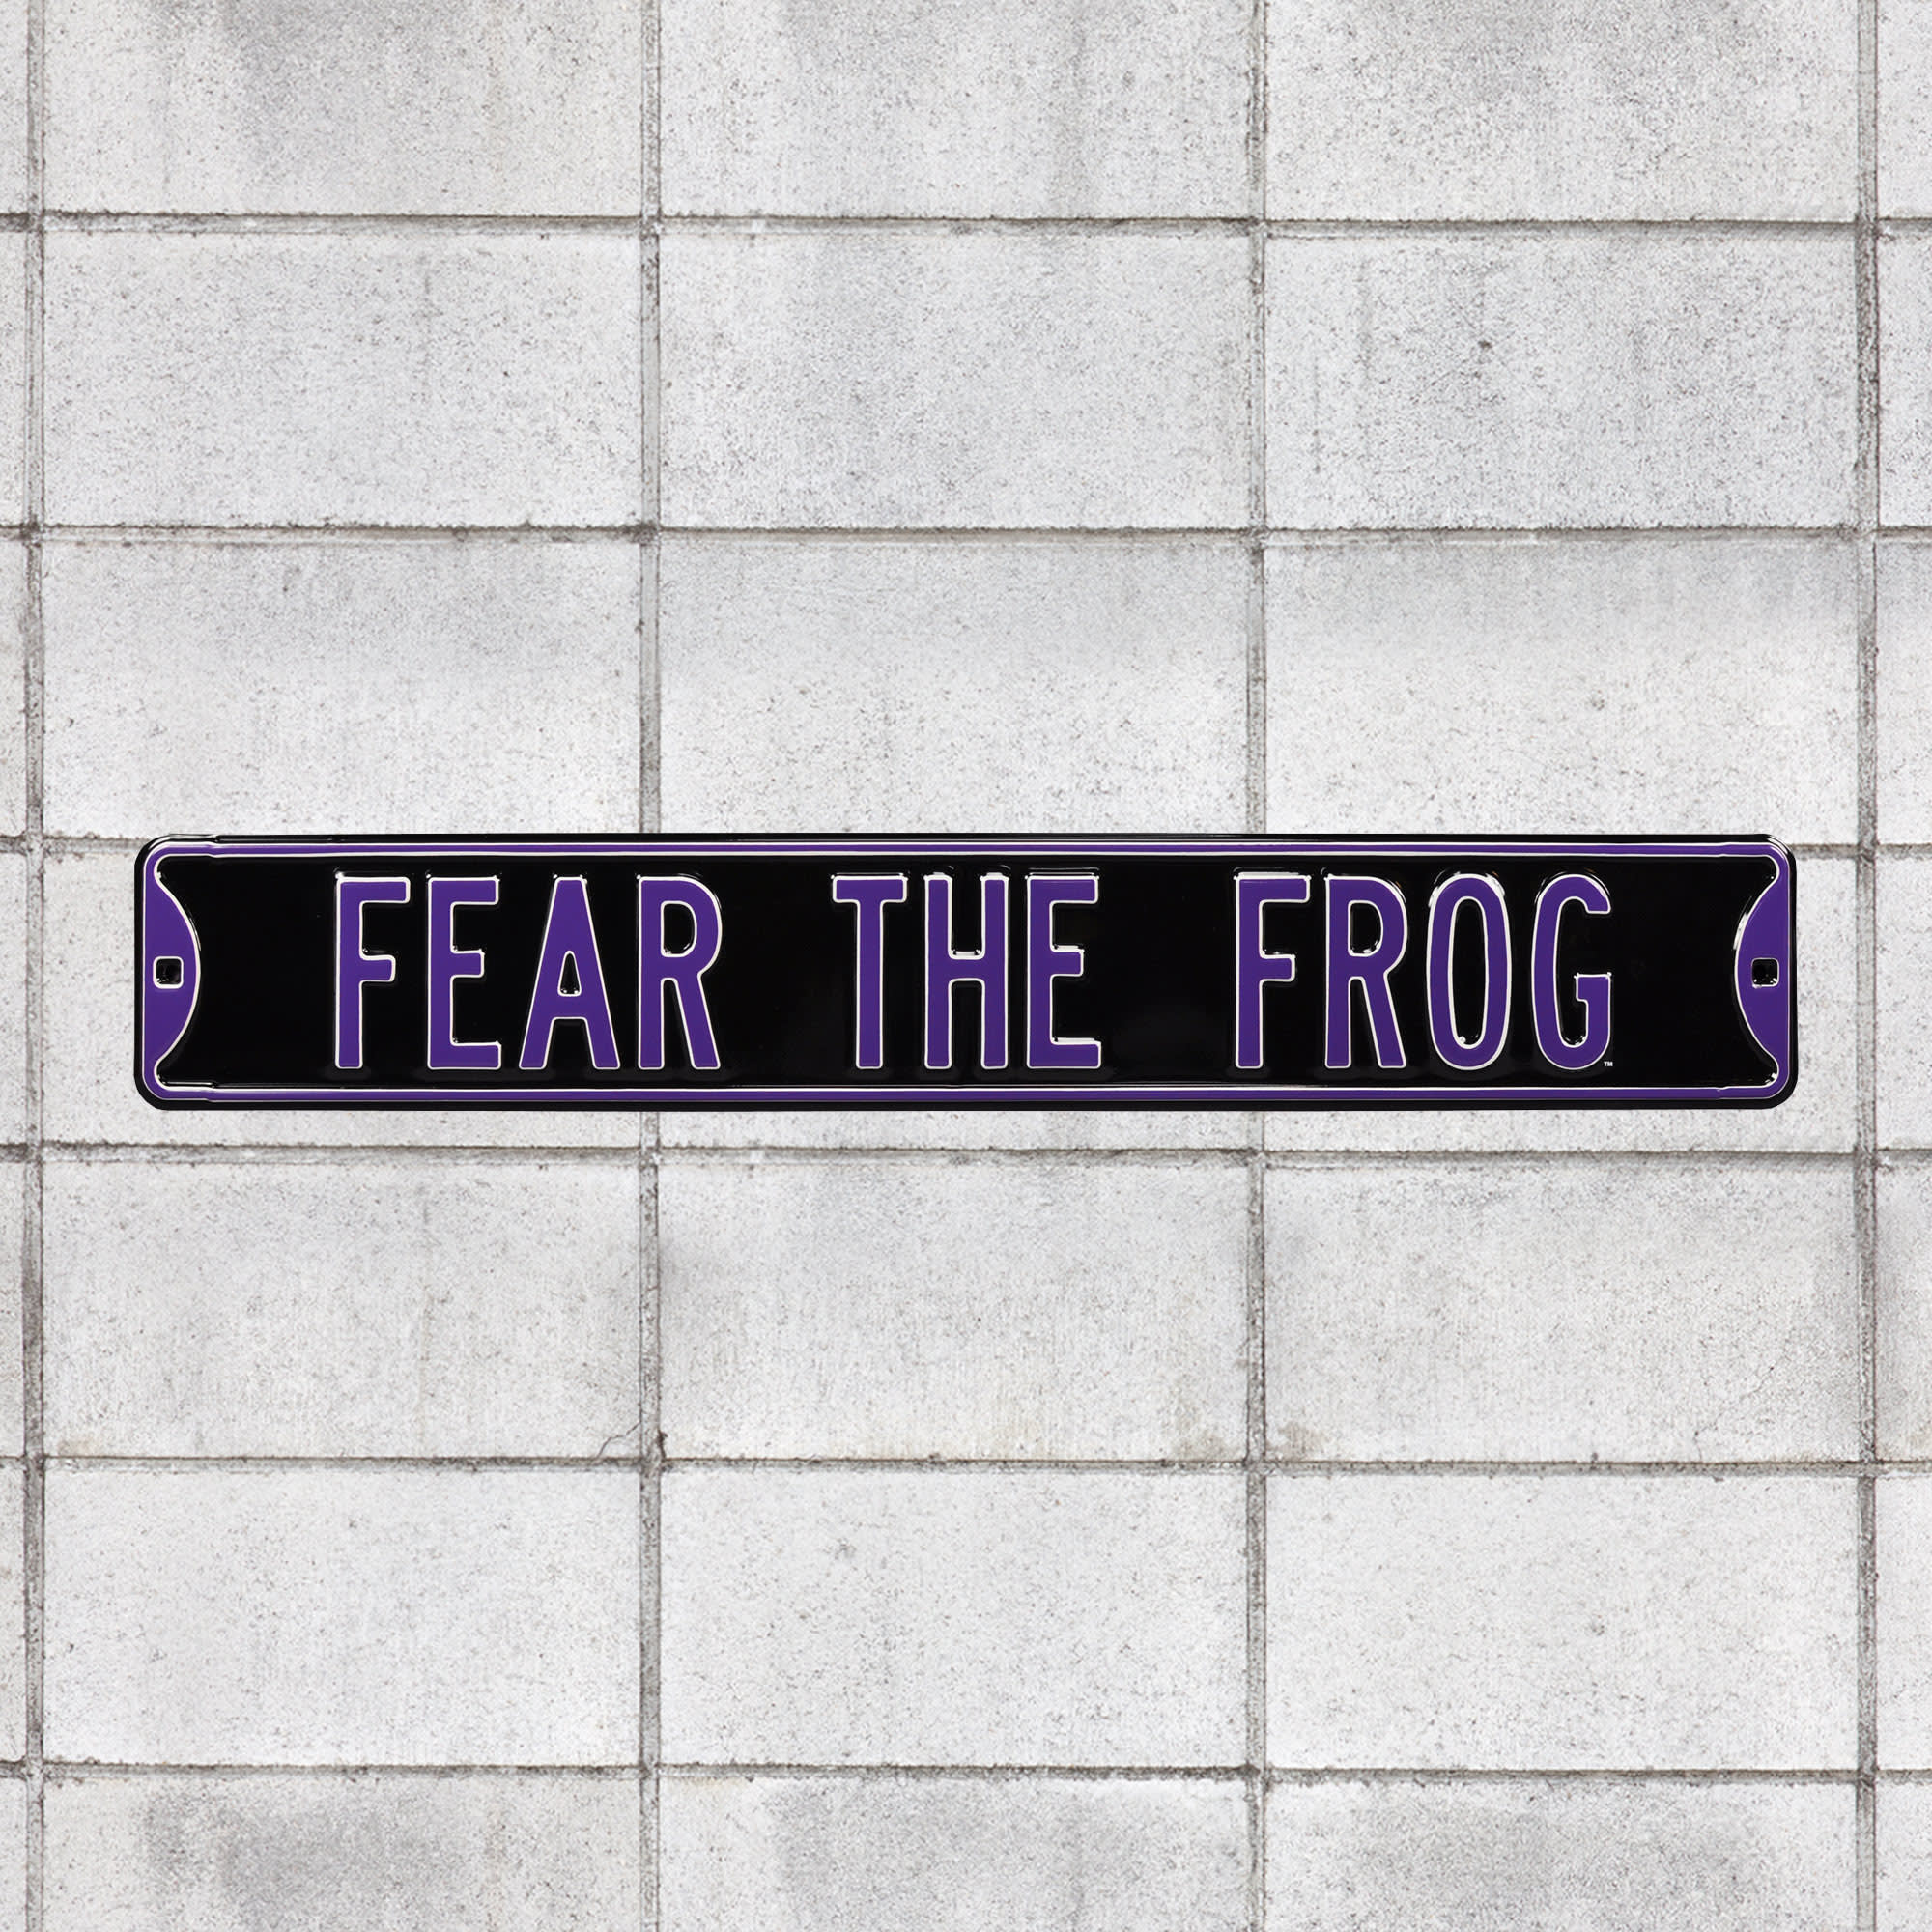 TCU for TCU Horned Frogs: Fear The Frog - Officially Licensed Metal Street Sign 36.0"W x 6.0"H by Fathead | 100% Steel